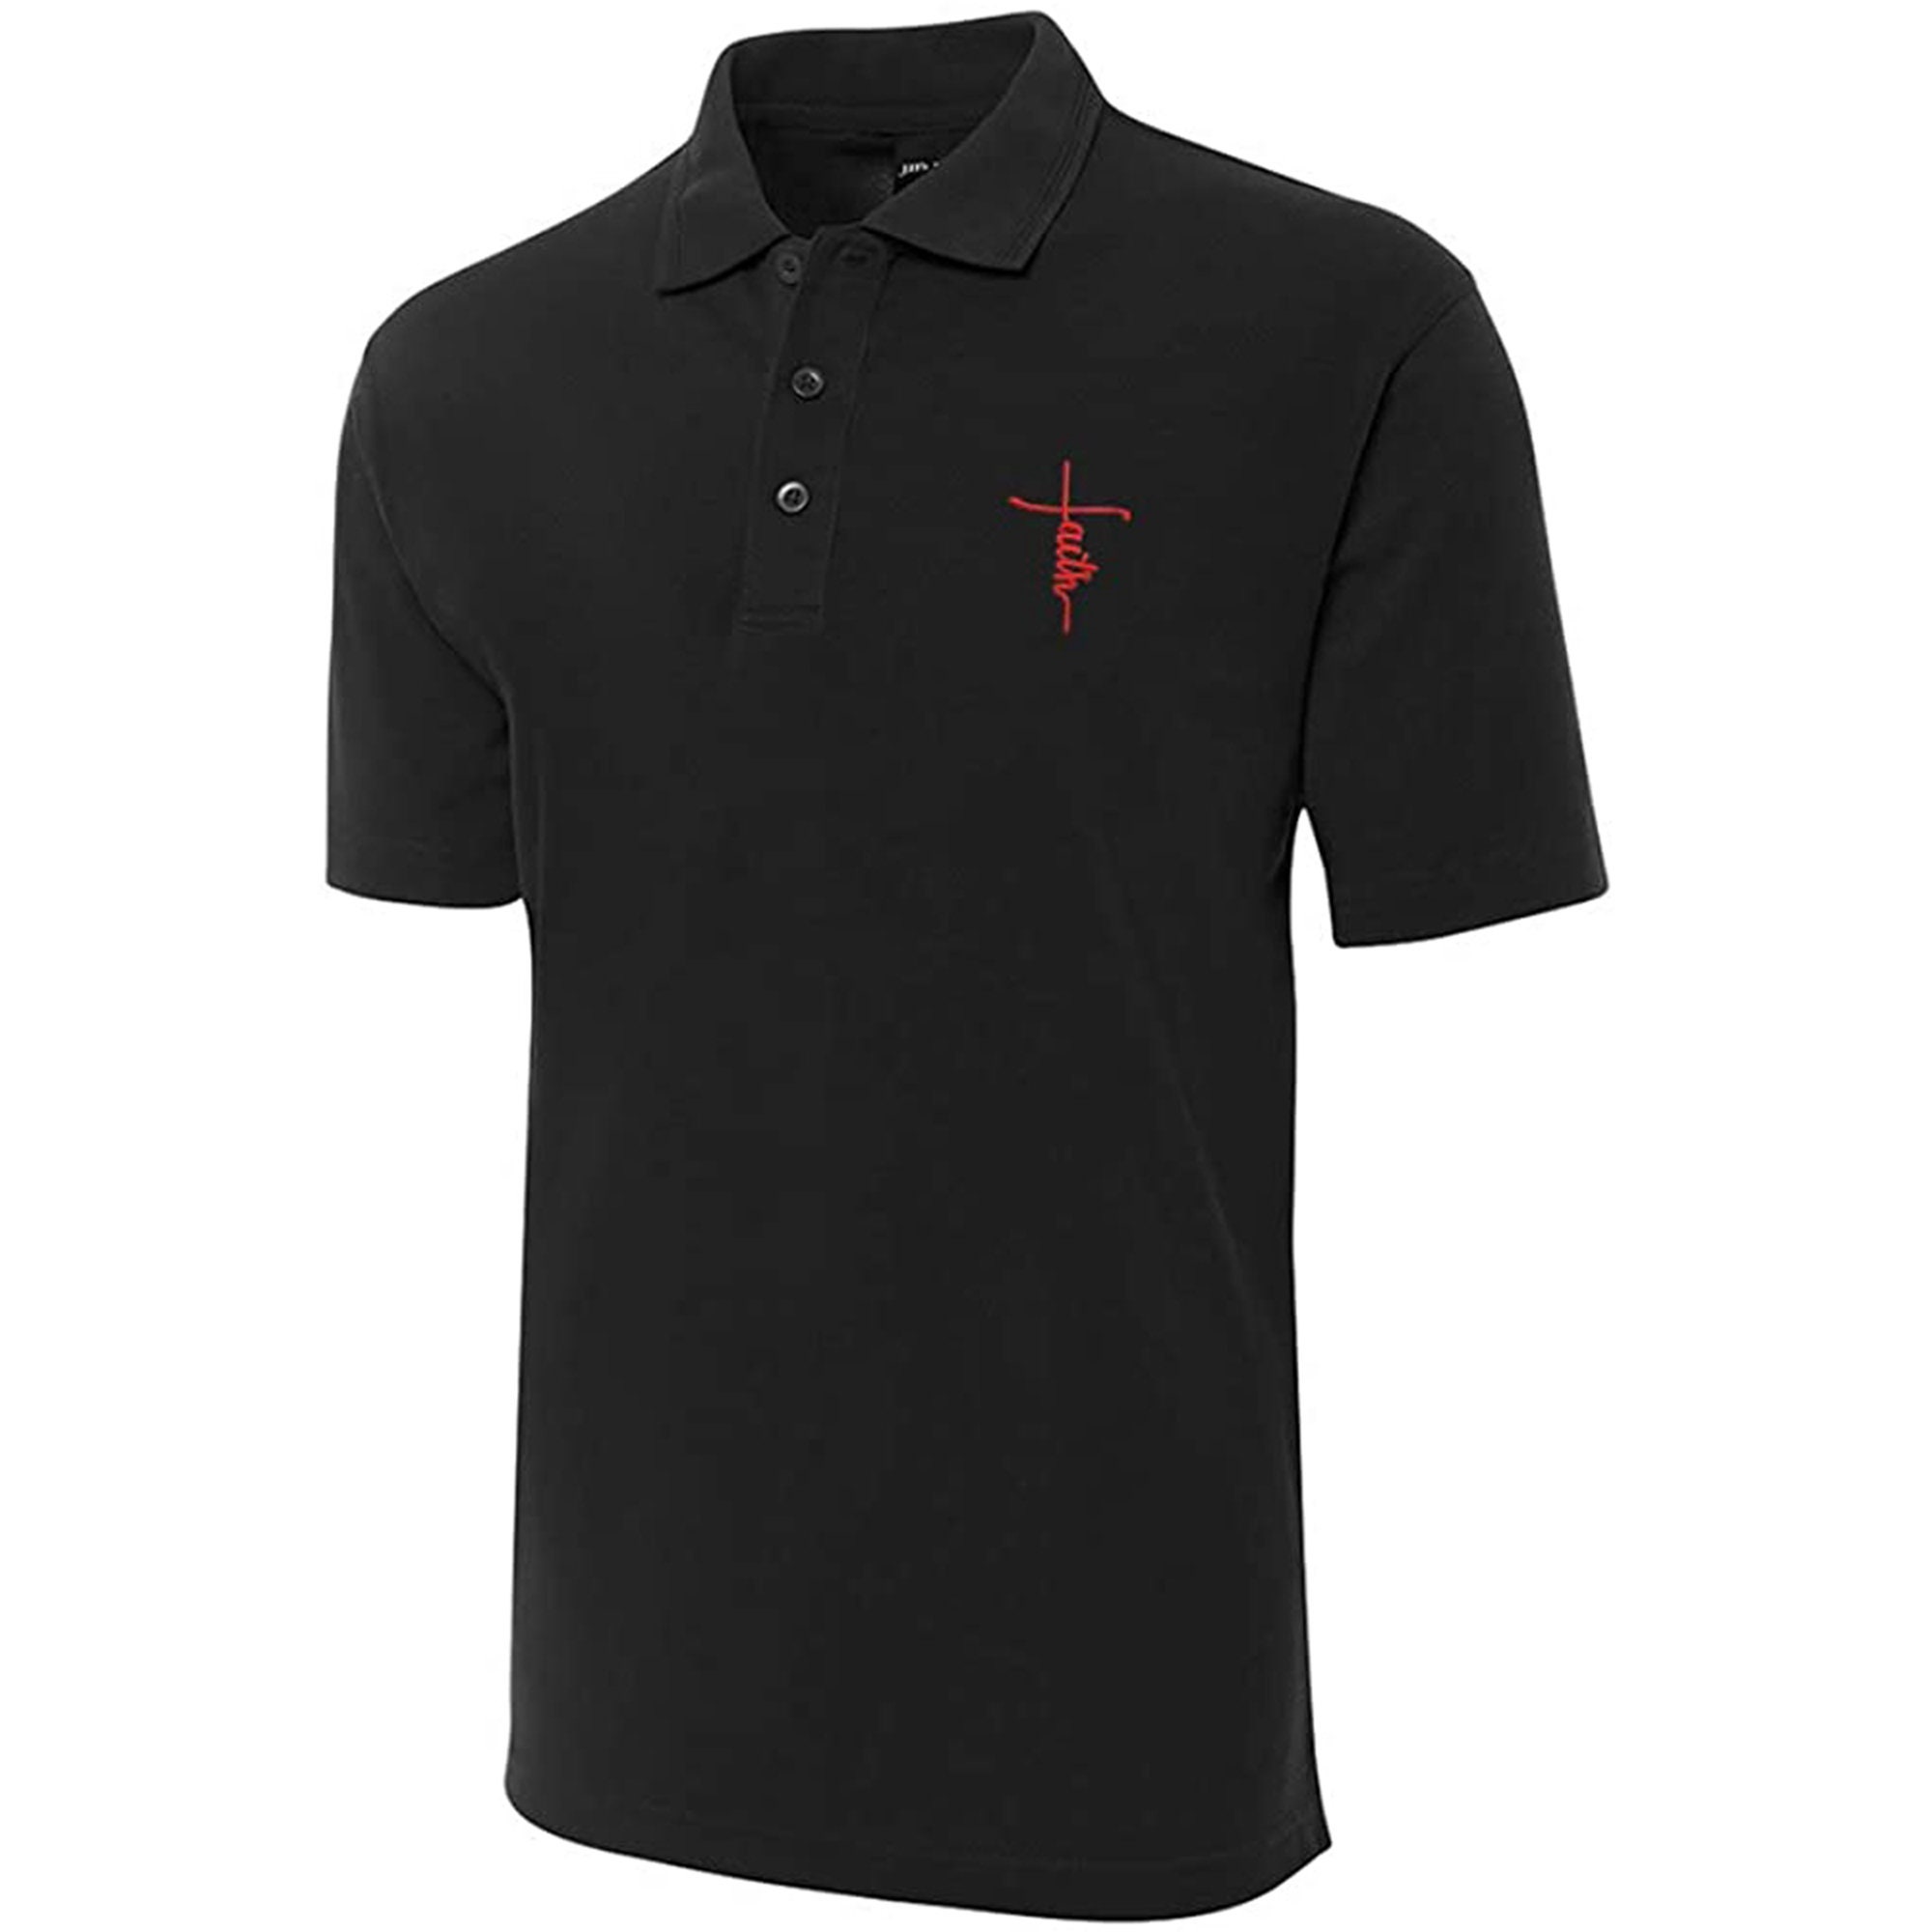 Jesus Cross Embroidered Short Sleeve Polo Shirts Classic Embroidery Men's Polo Shirt